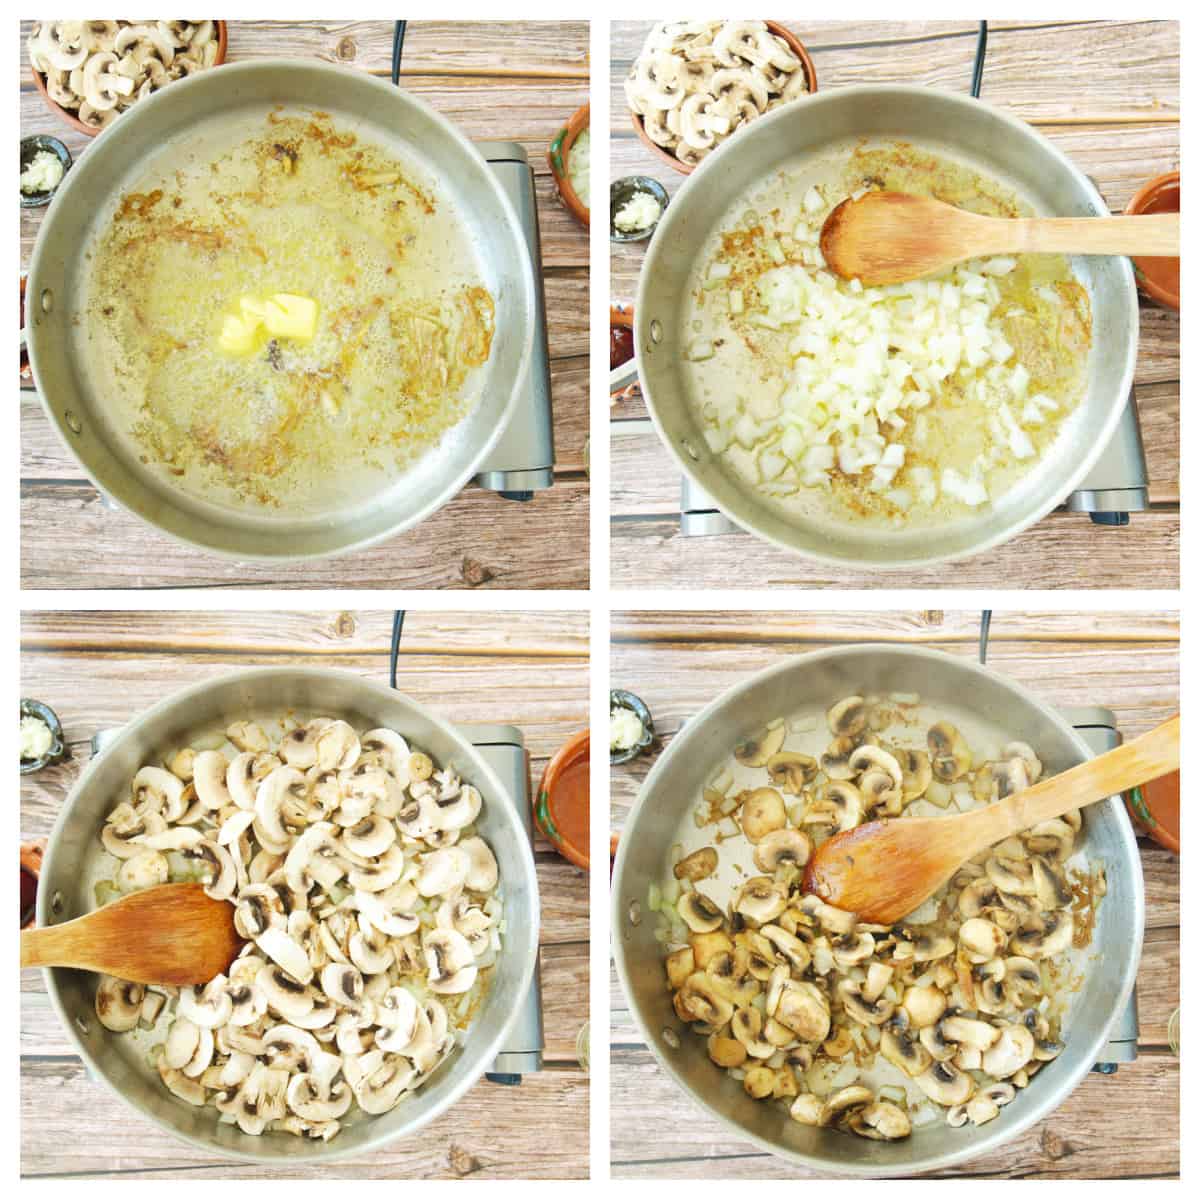 A collage showing how to cook the onion and mushrooms in a skillet.